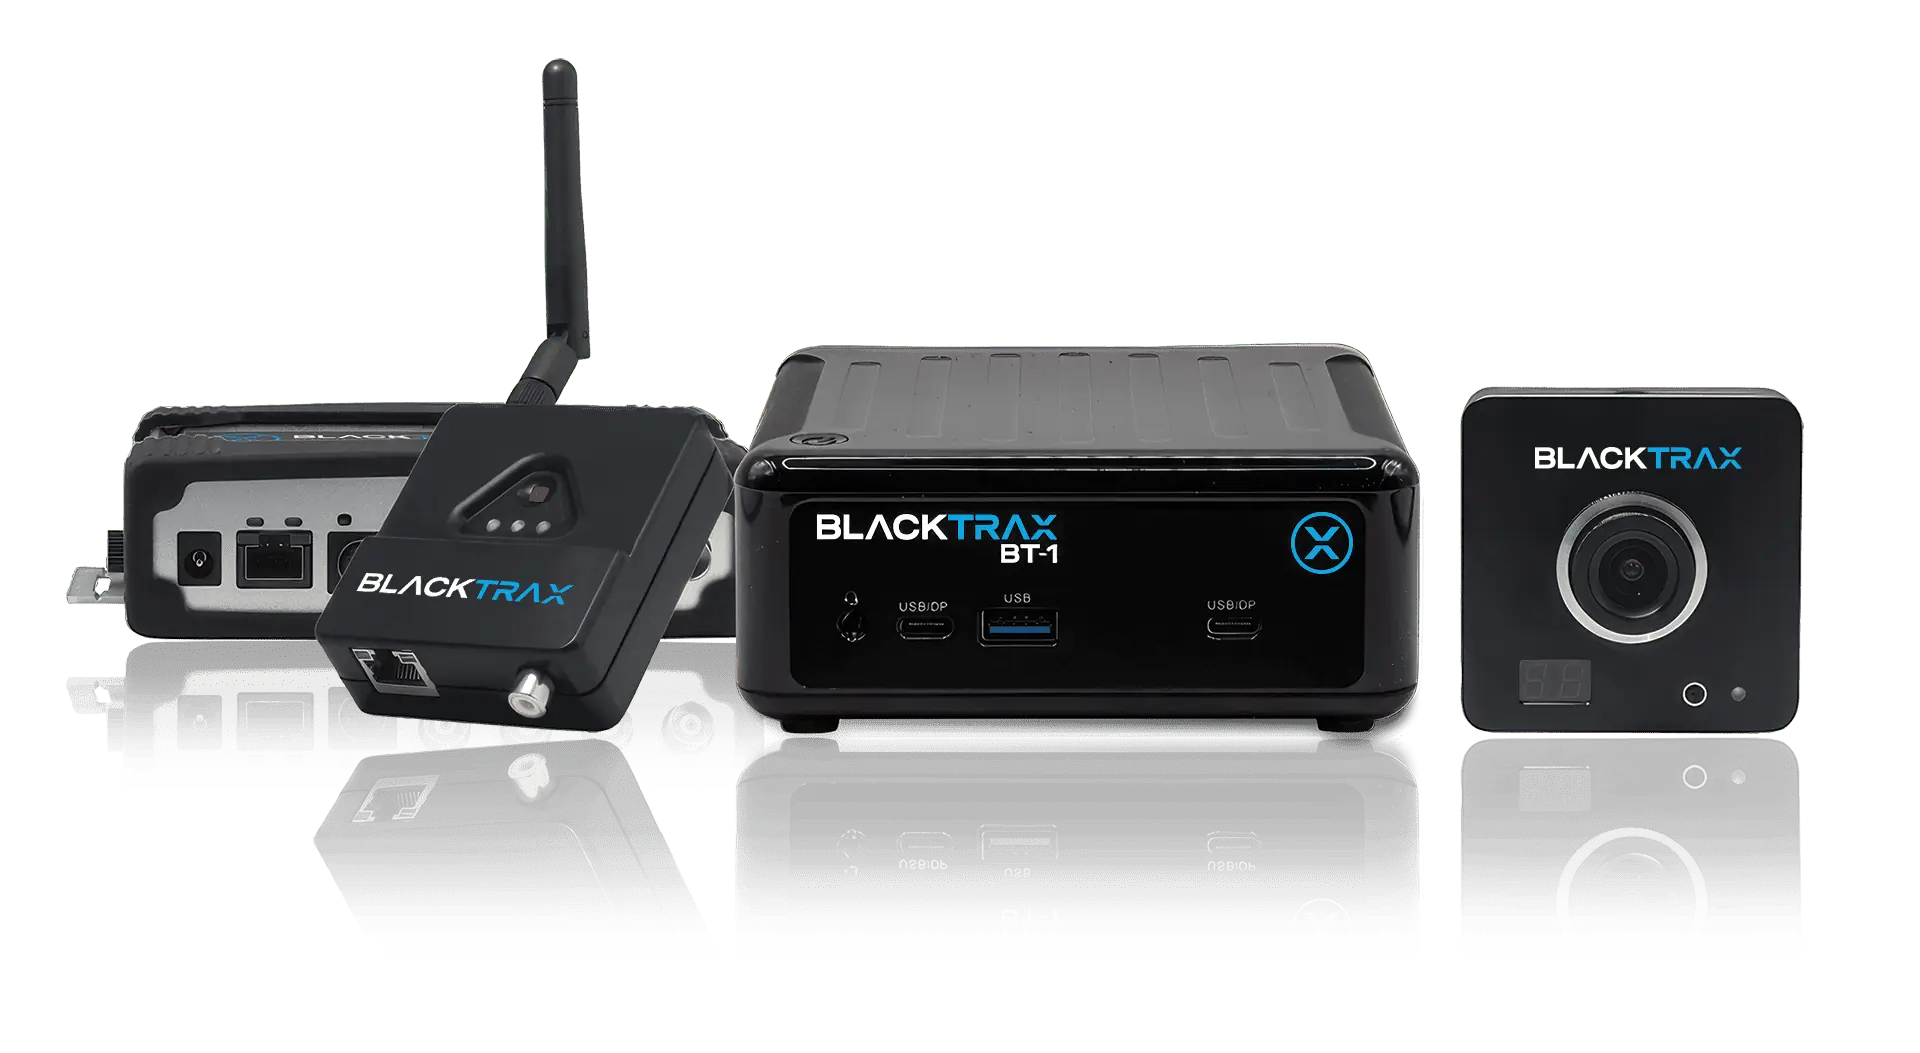 BlackTrax BT-1 - The new compact and portable tracking system